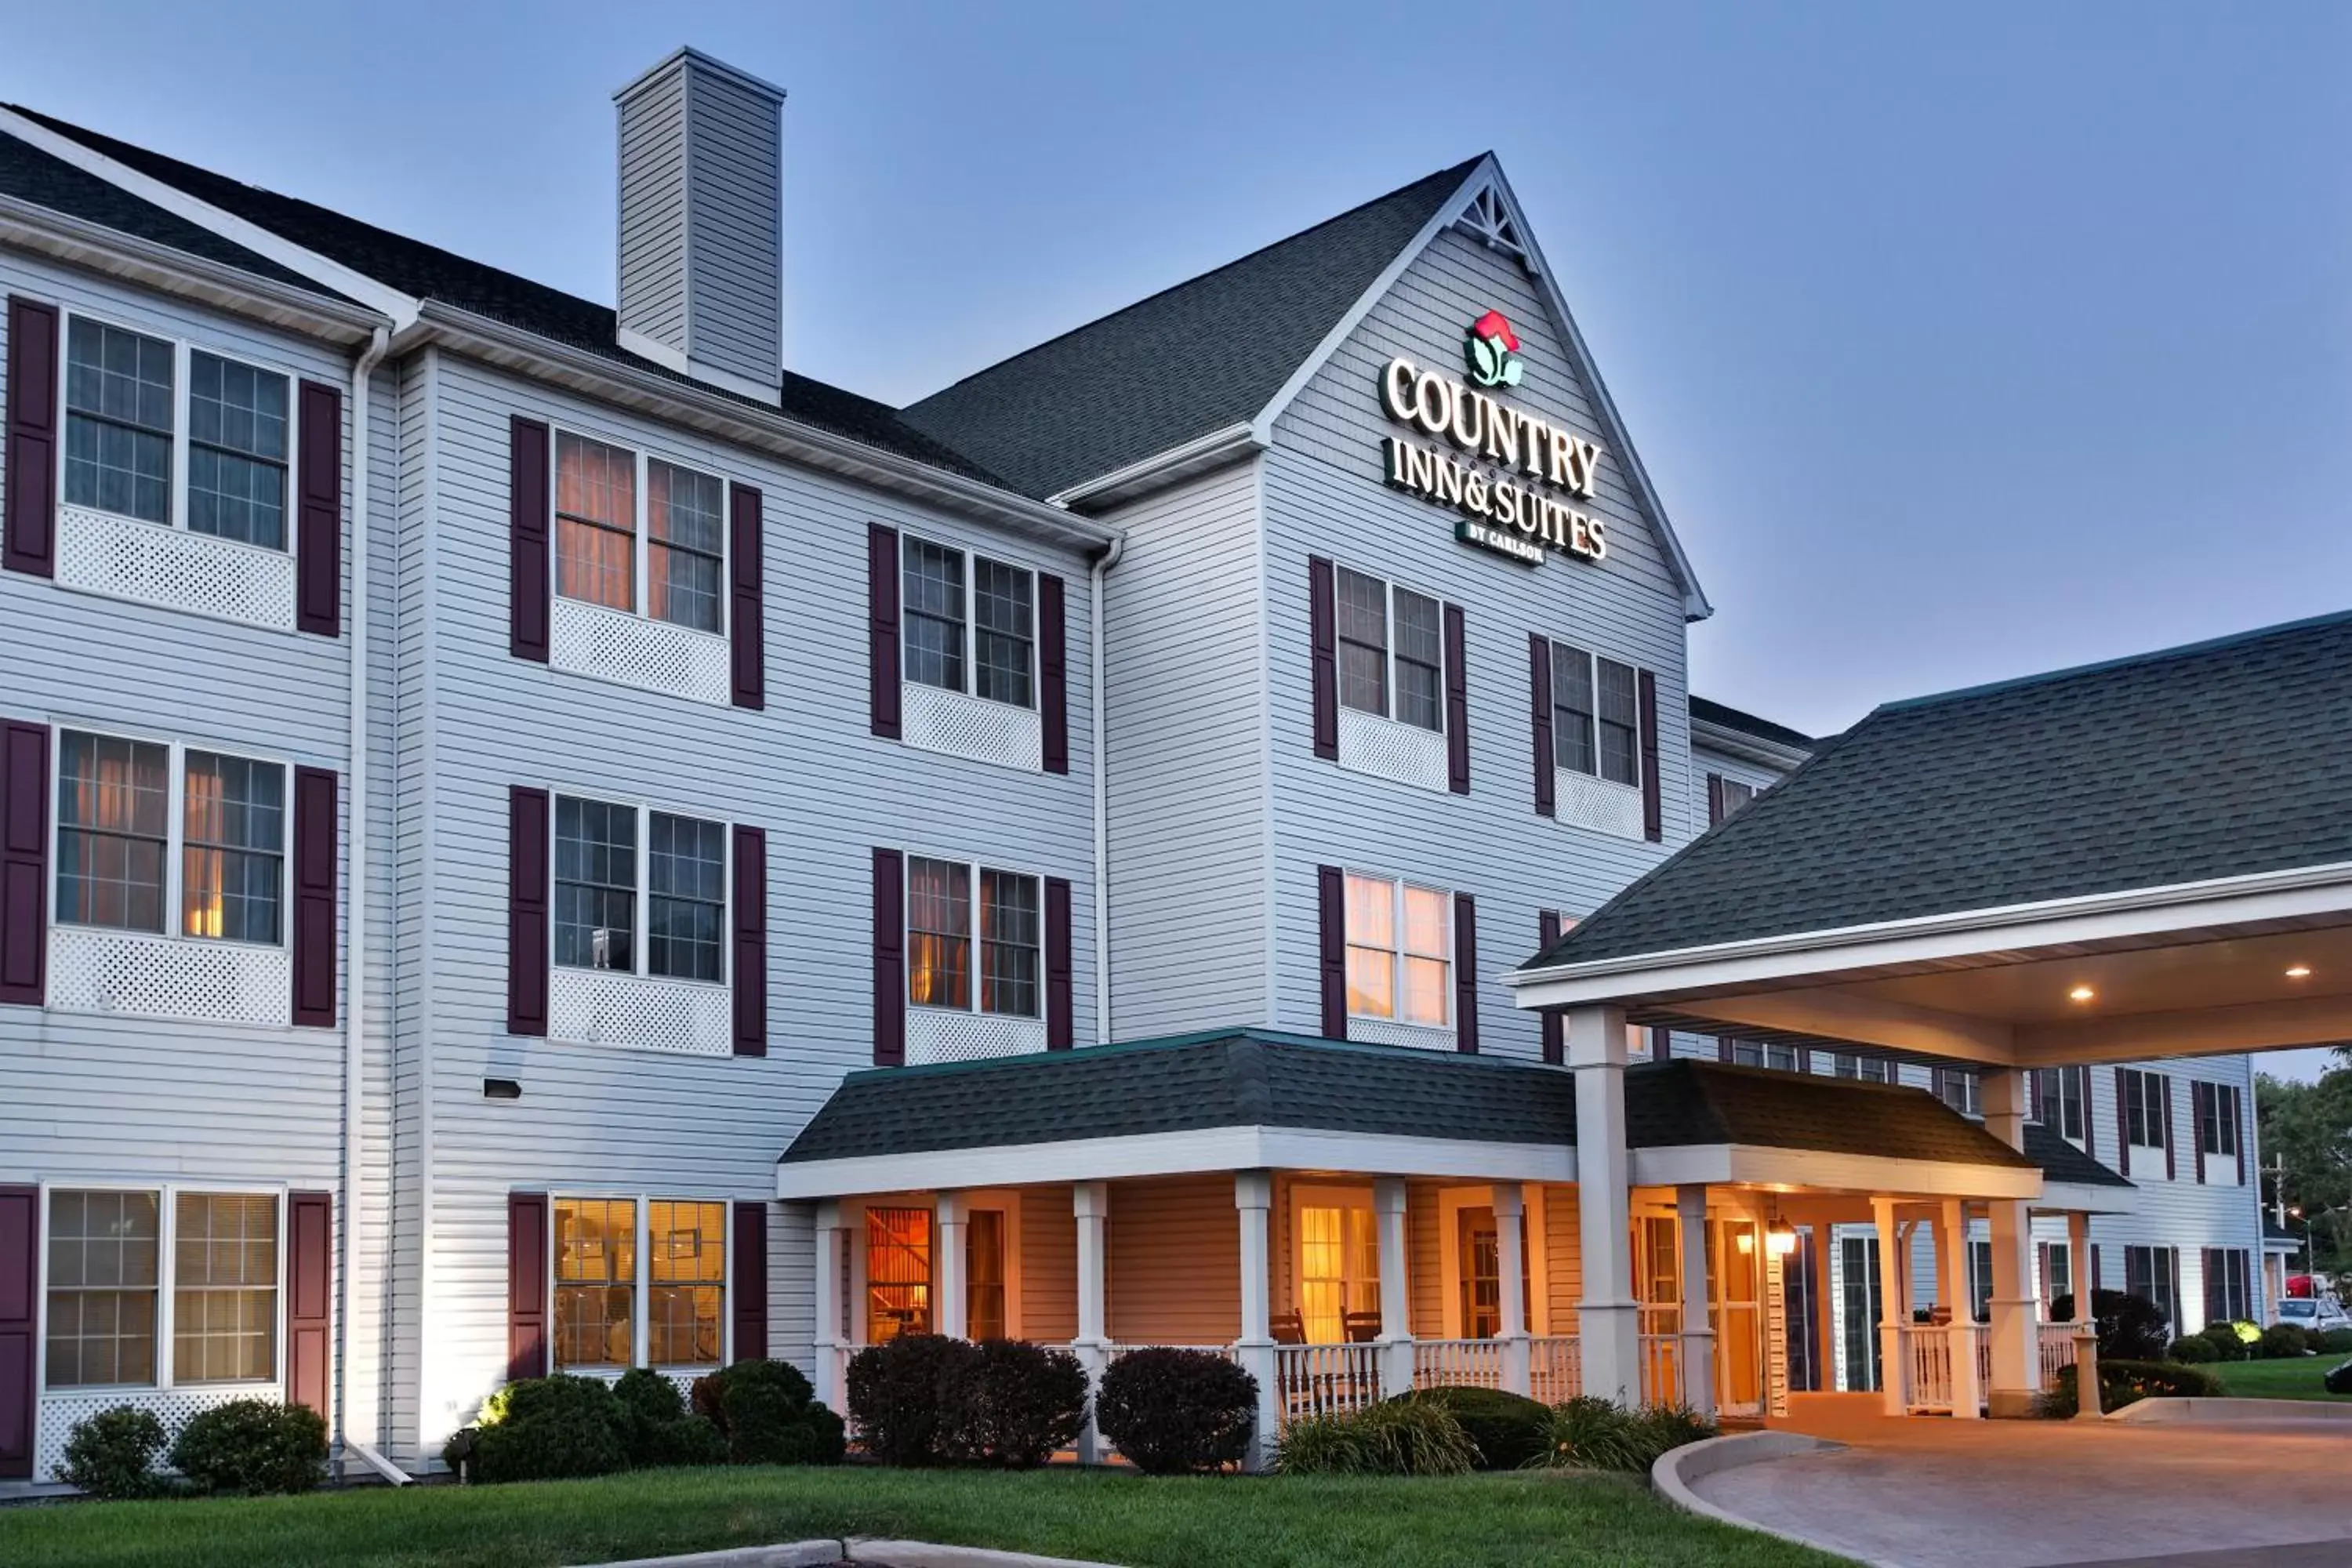 Facade/entrance, Property Building in Country Inn & Suites by Radisson, Rock Falls, IL